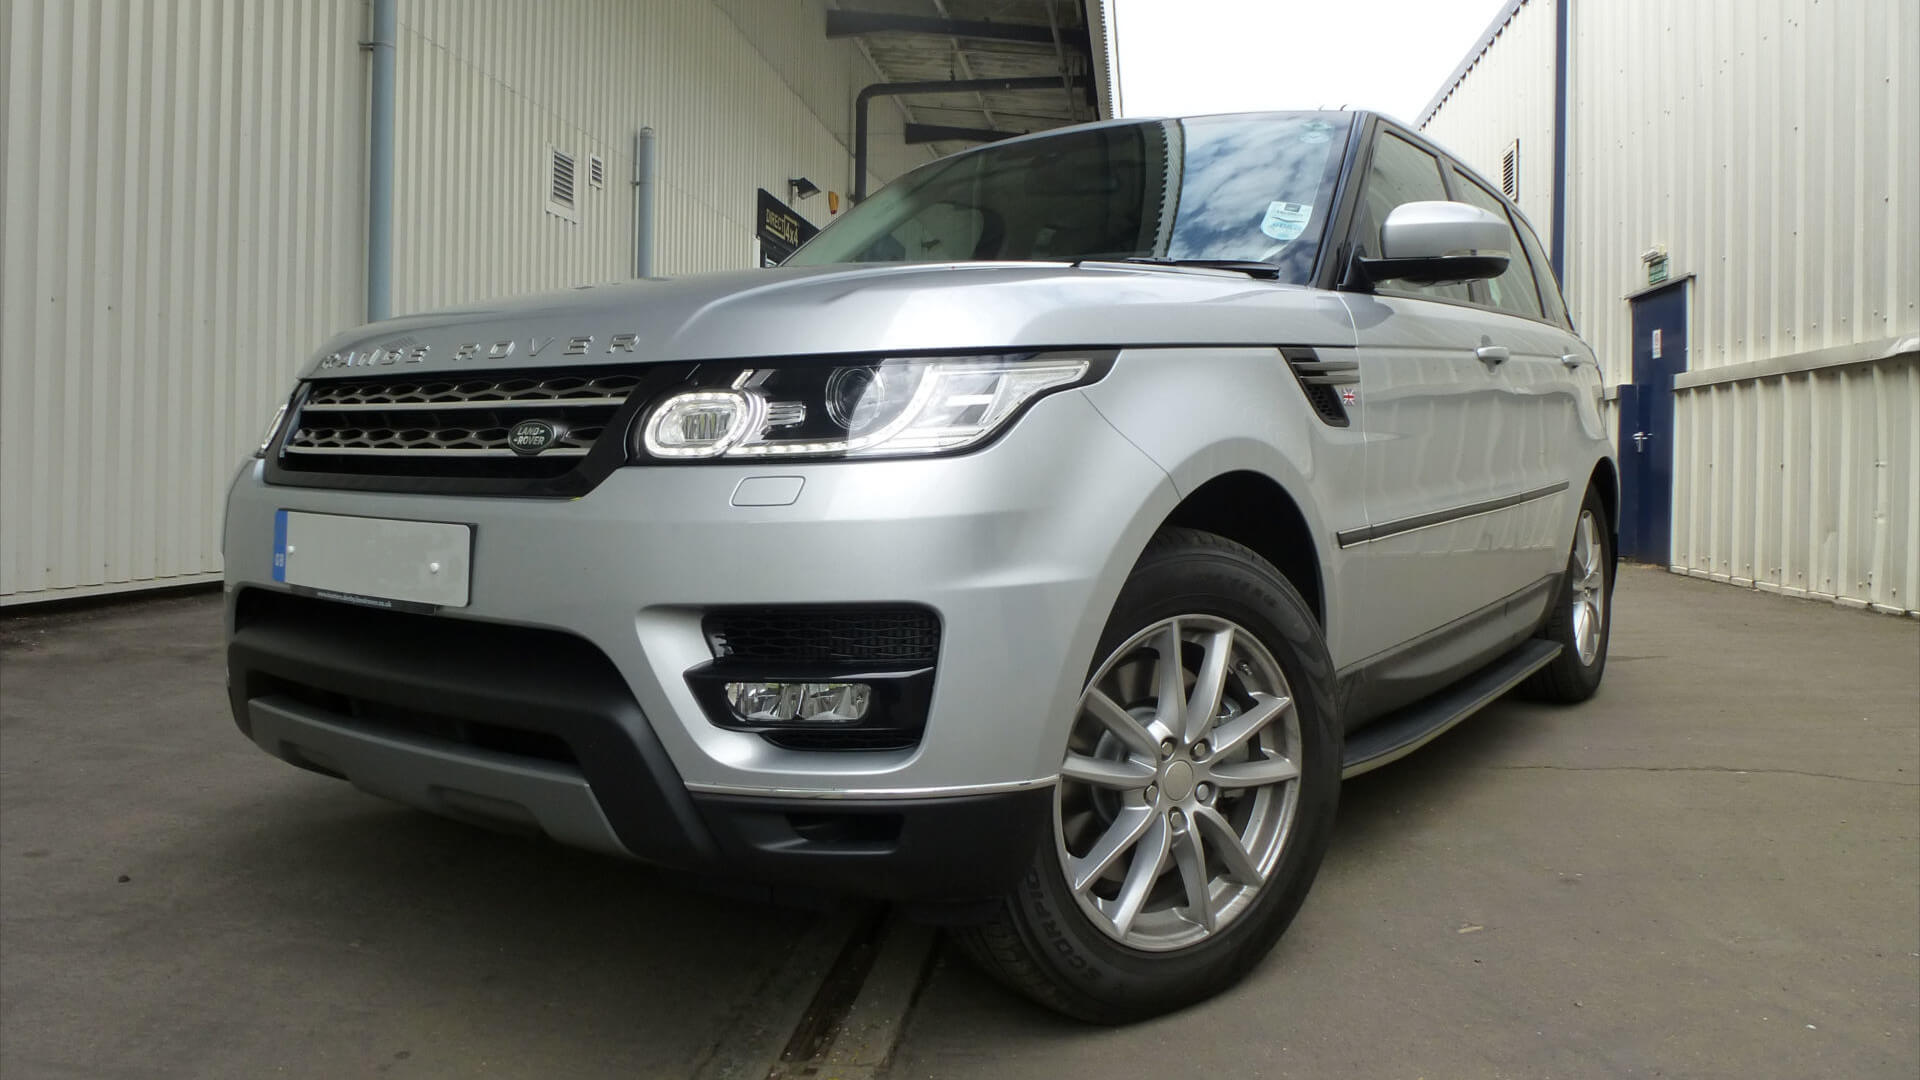 Direct4x4 Accessories for Range Rover Sport Vehicles